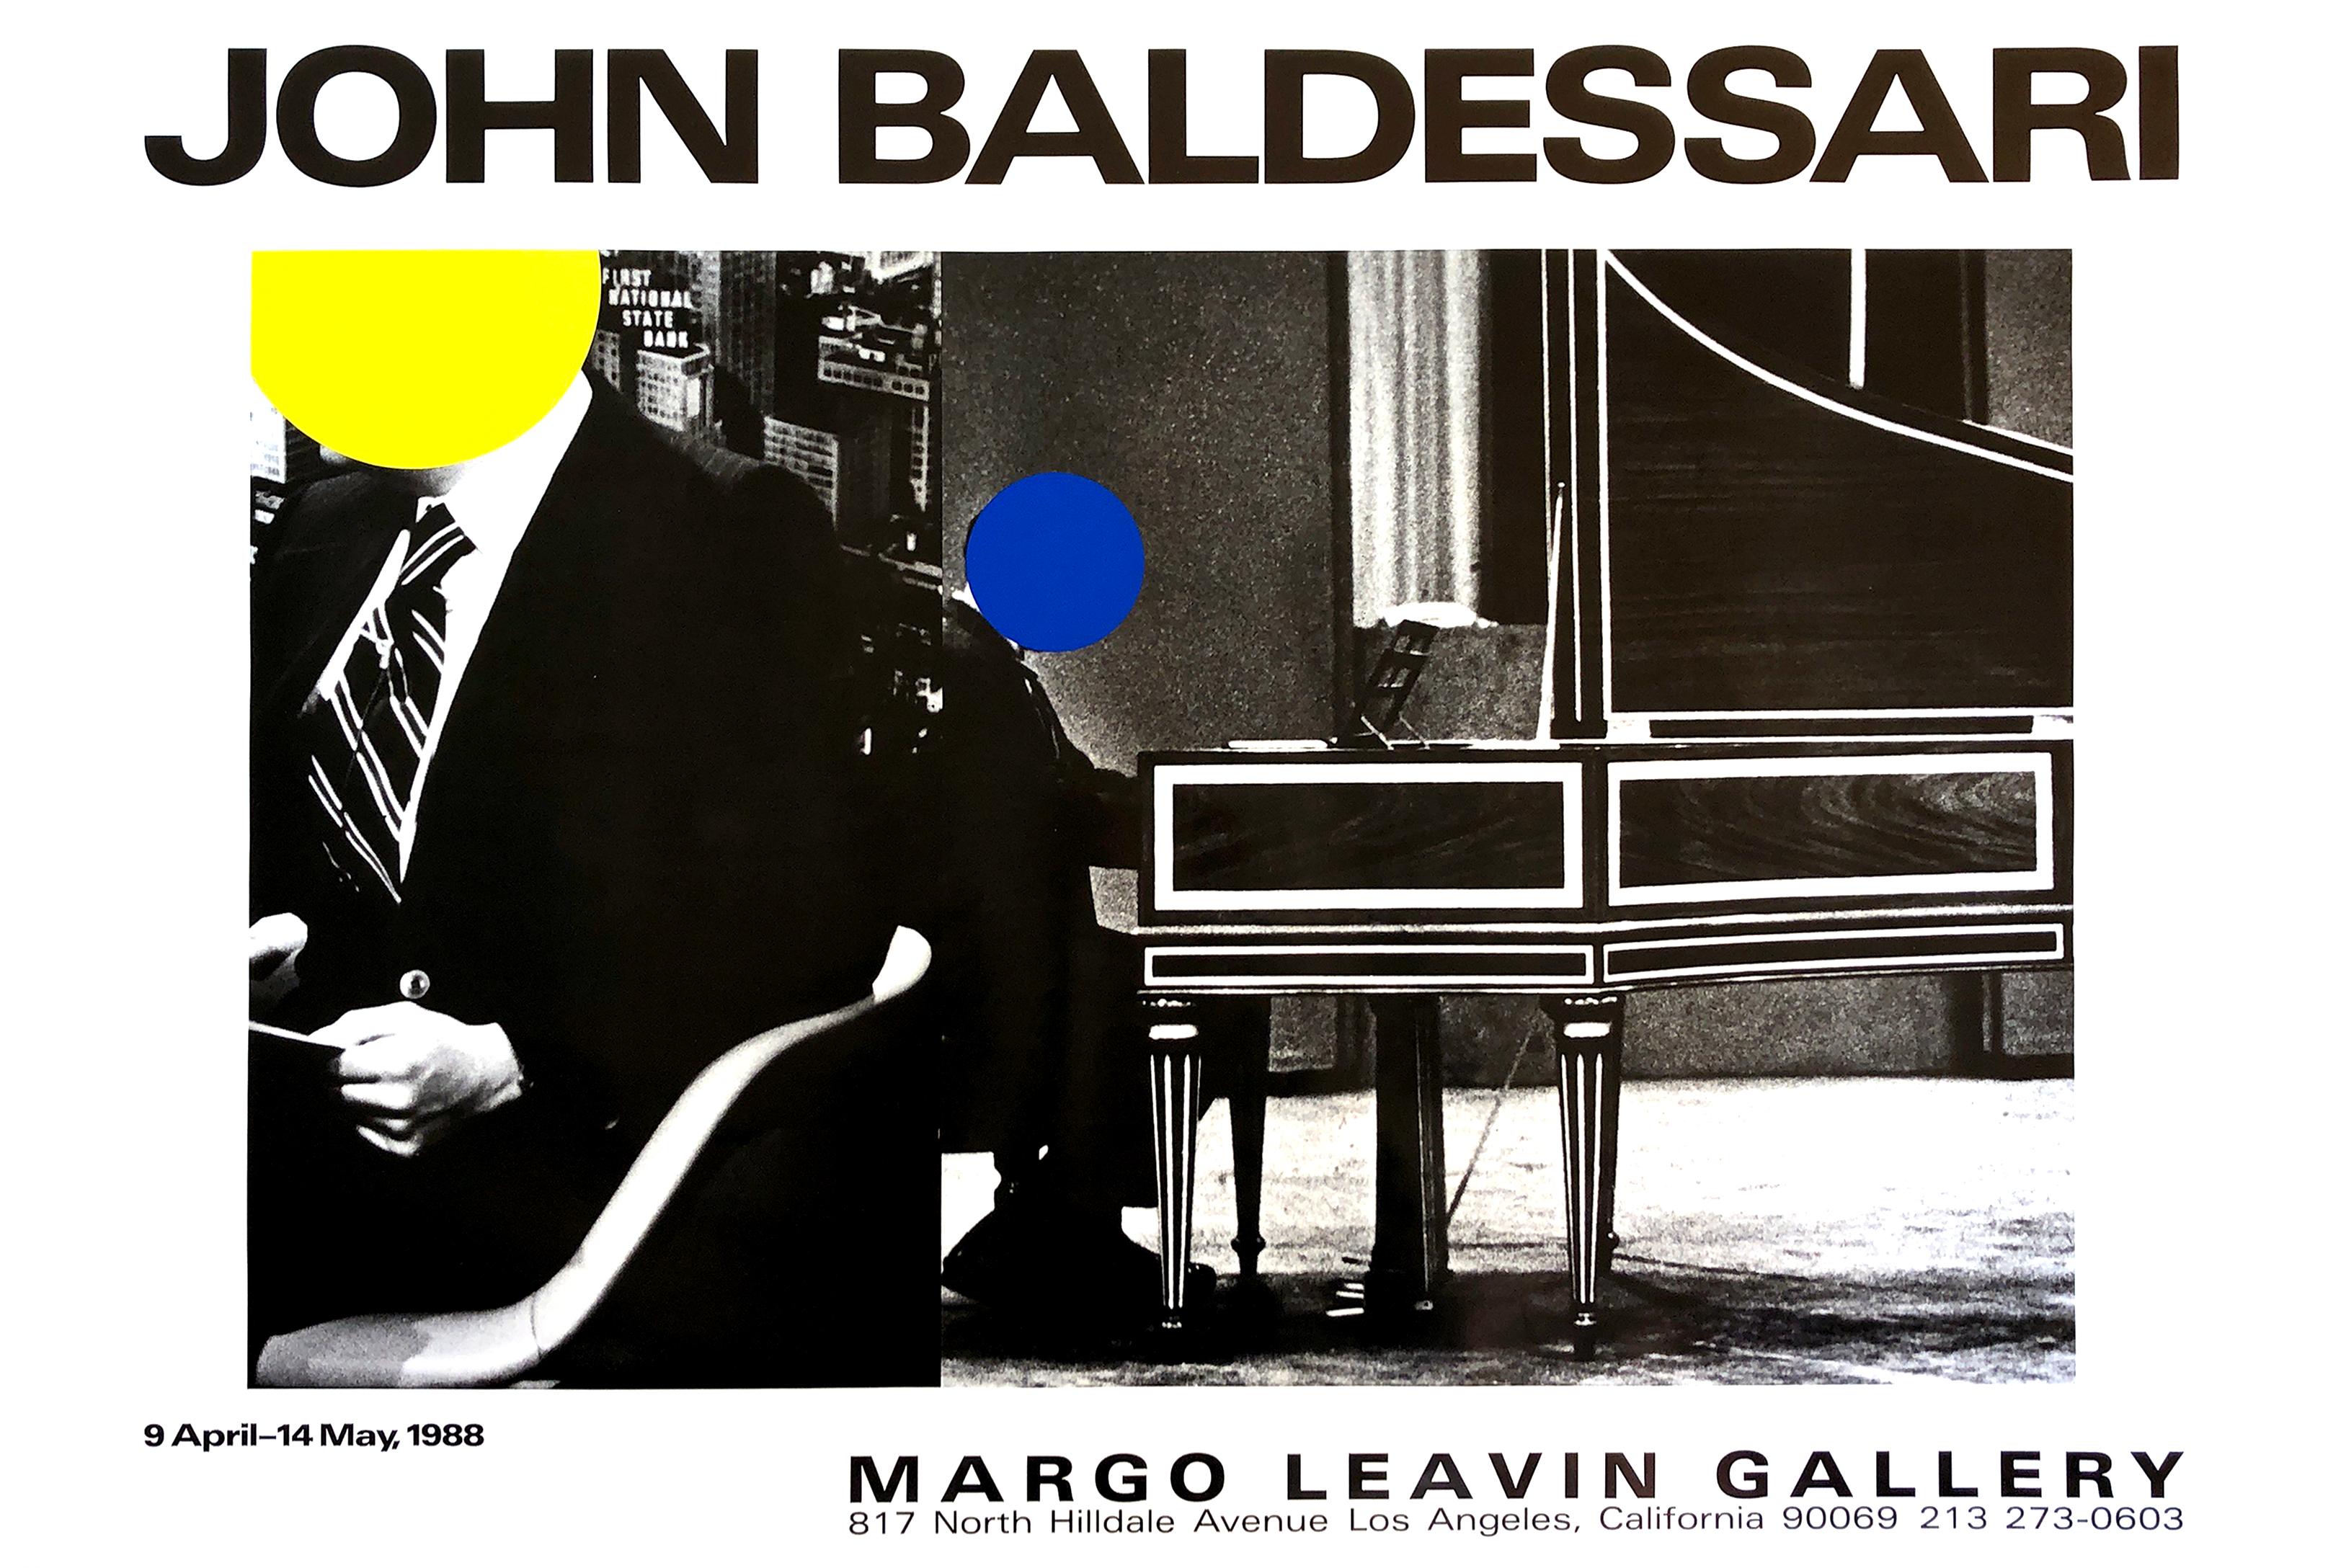 Exhibition poster from "John Baldessari" exhibition at Margo Leavin Gallery in 1988:

John Baldessari
"John Baldessari"
Margo Leavin Gallery, Los Angeles, 1988
Exhibition poster
27 x 40 inches
Unsigned